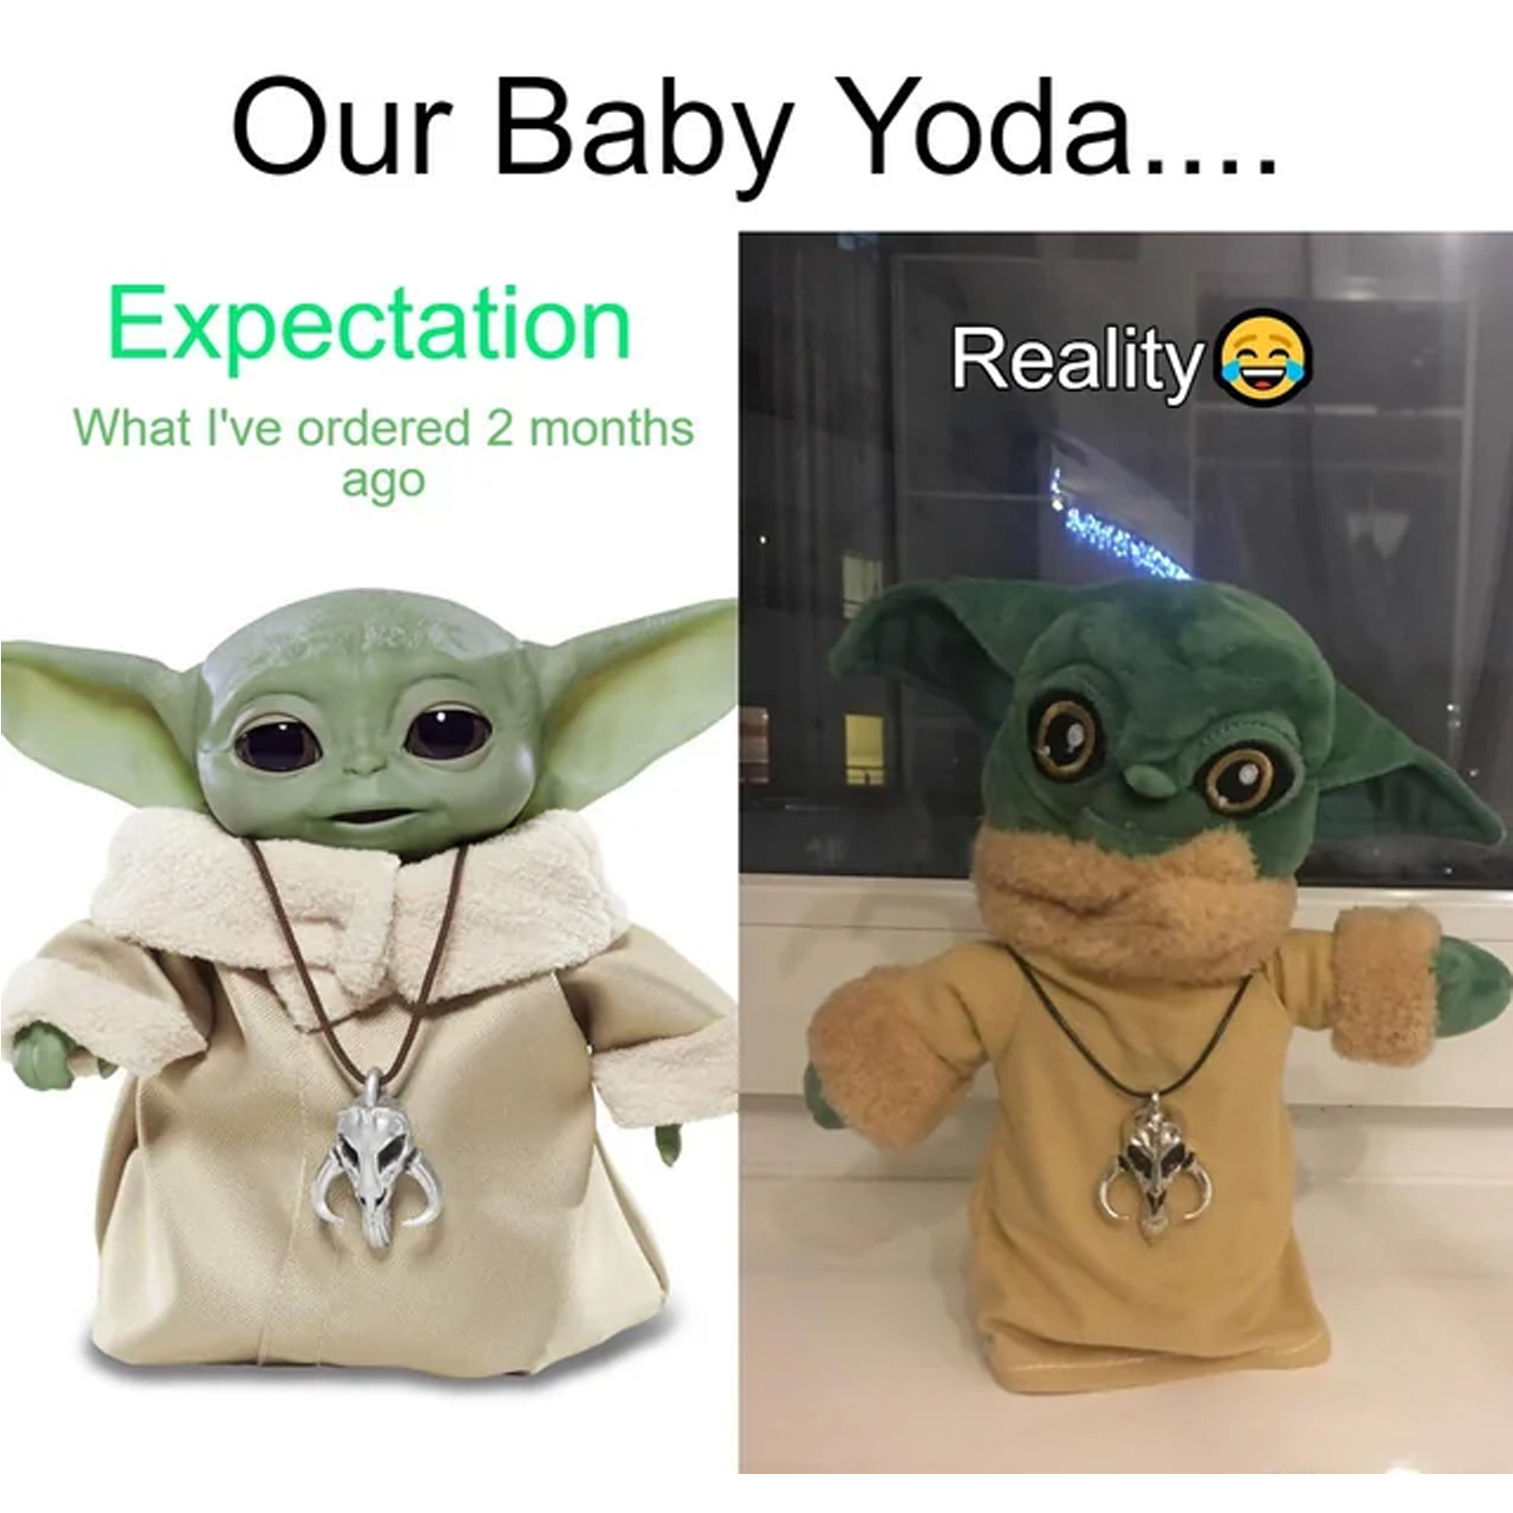 expectations vs reality - Our Baby Yoda.... Reality Expectation What I've ordered 2 months ago Bril H